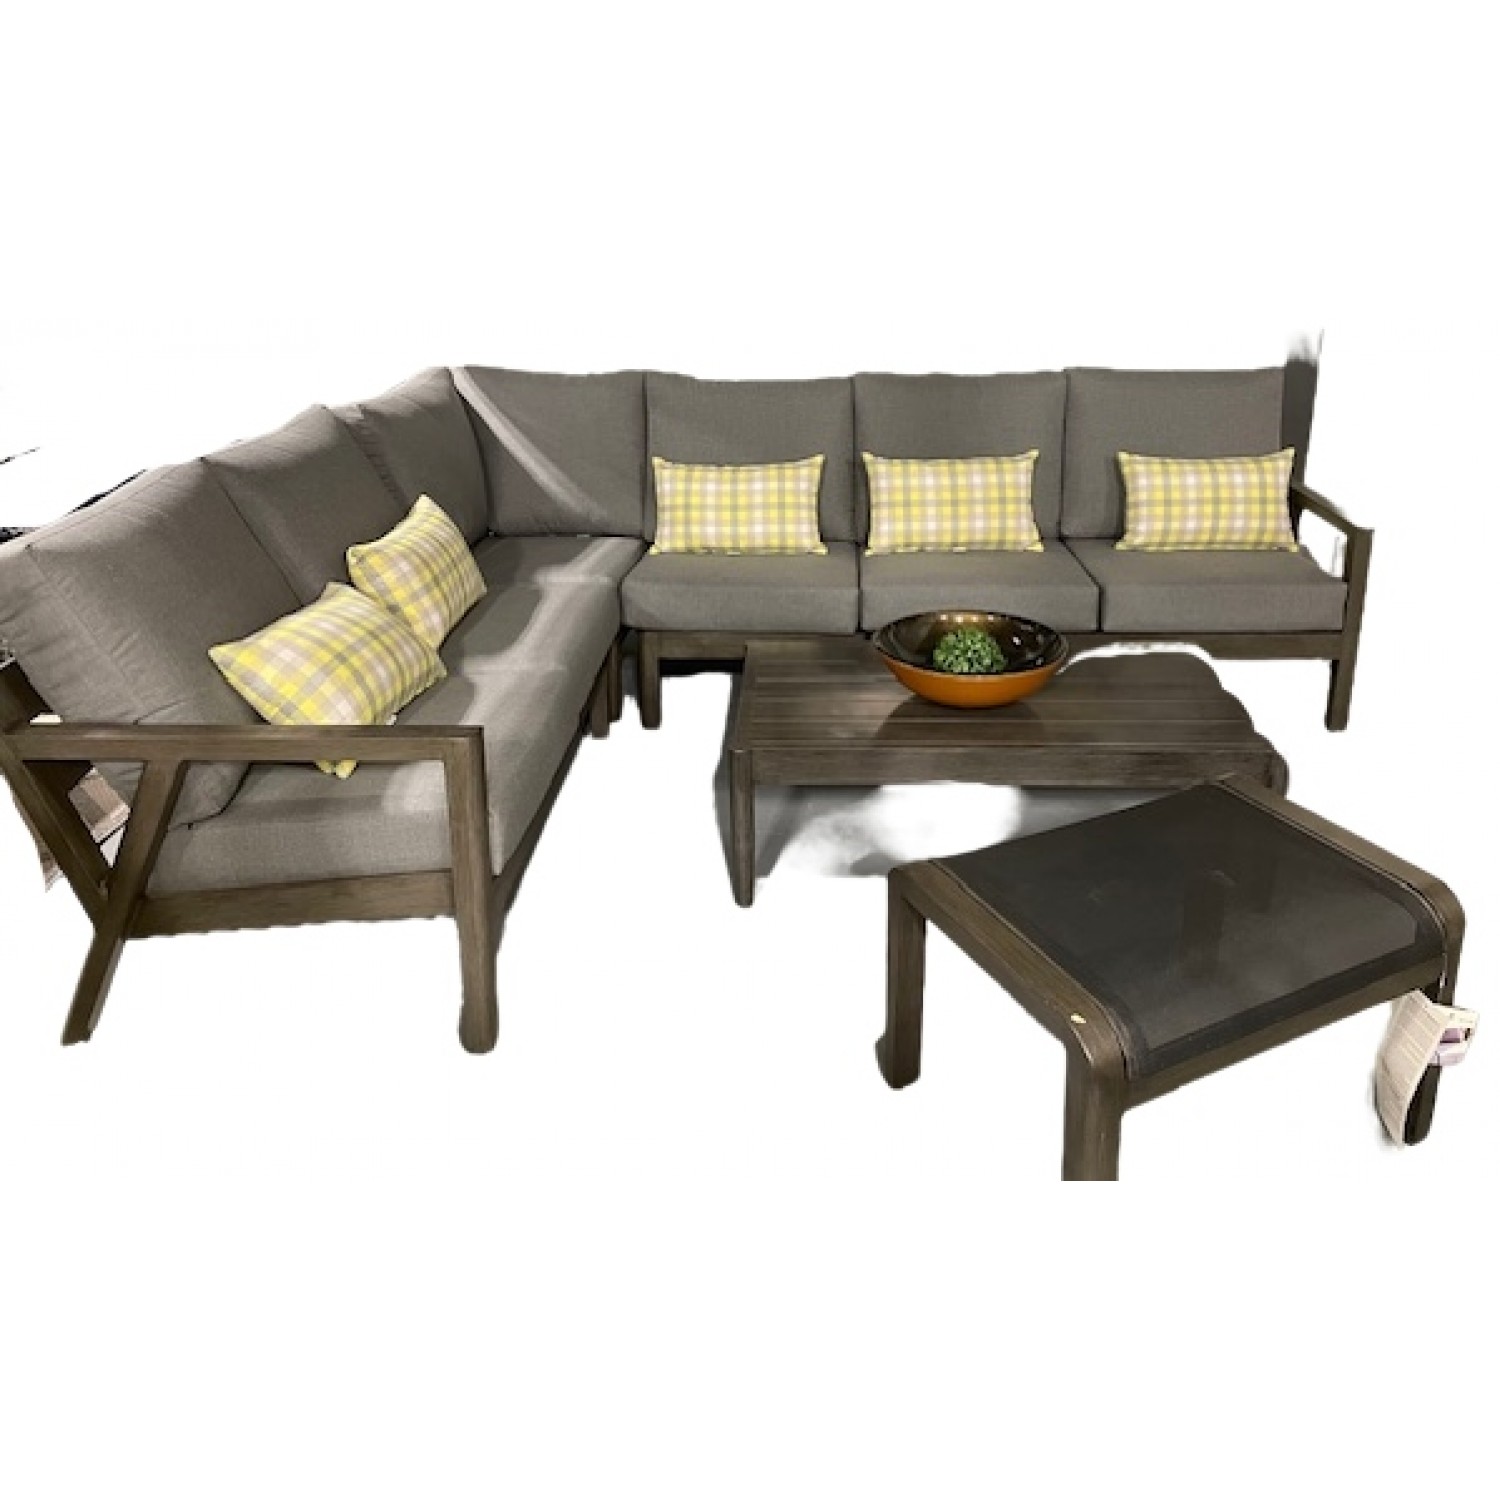 Nevis Outdoor Sectional